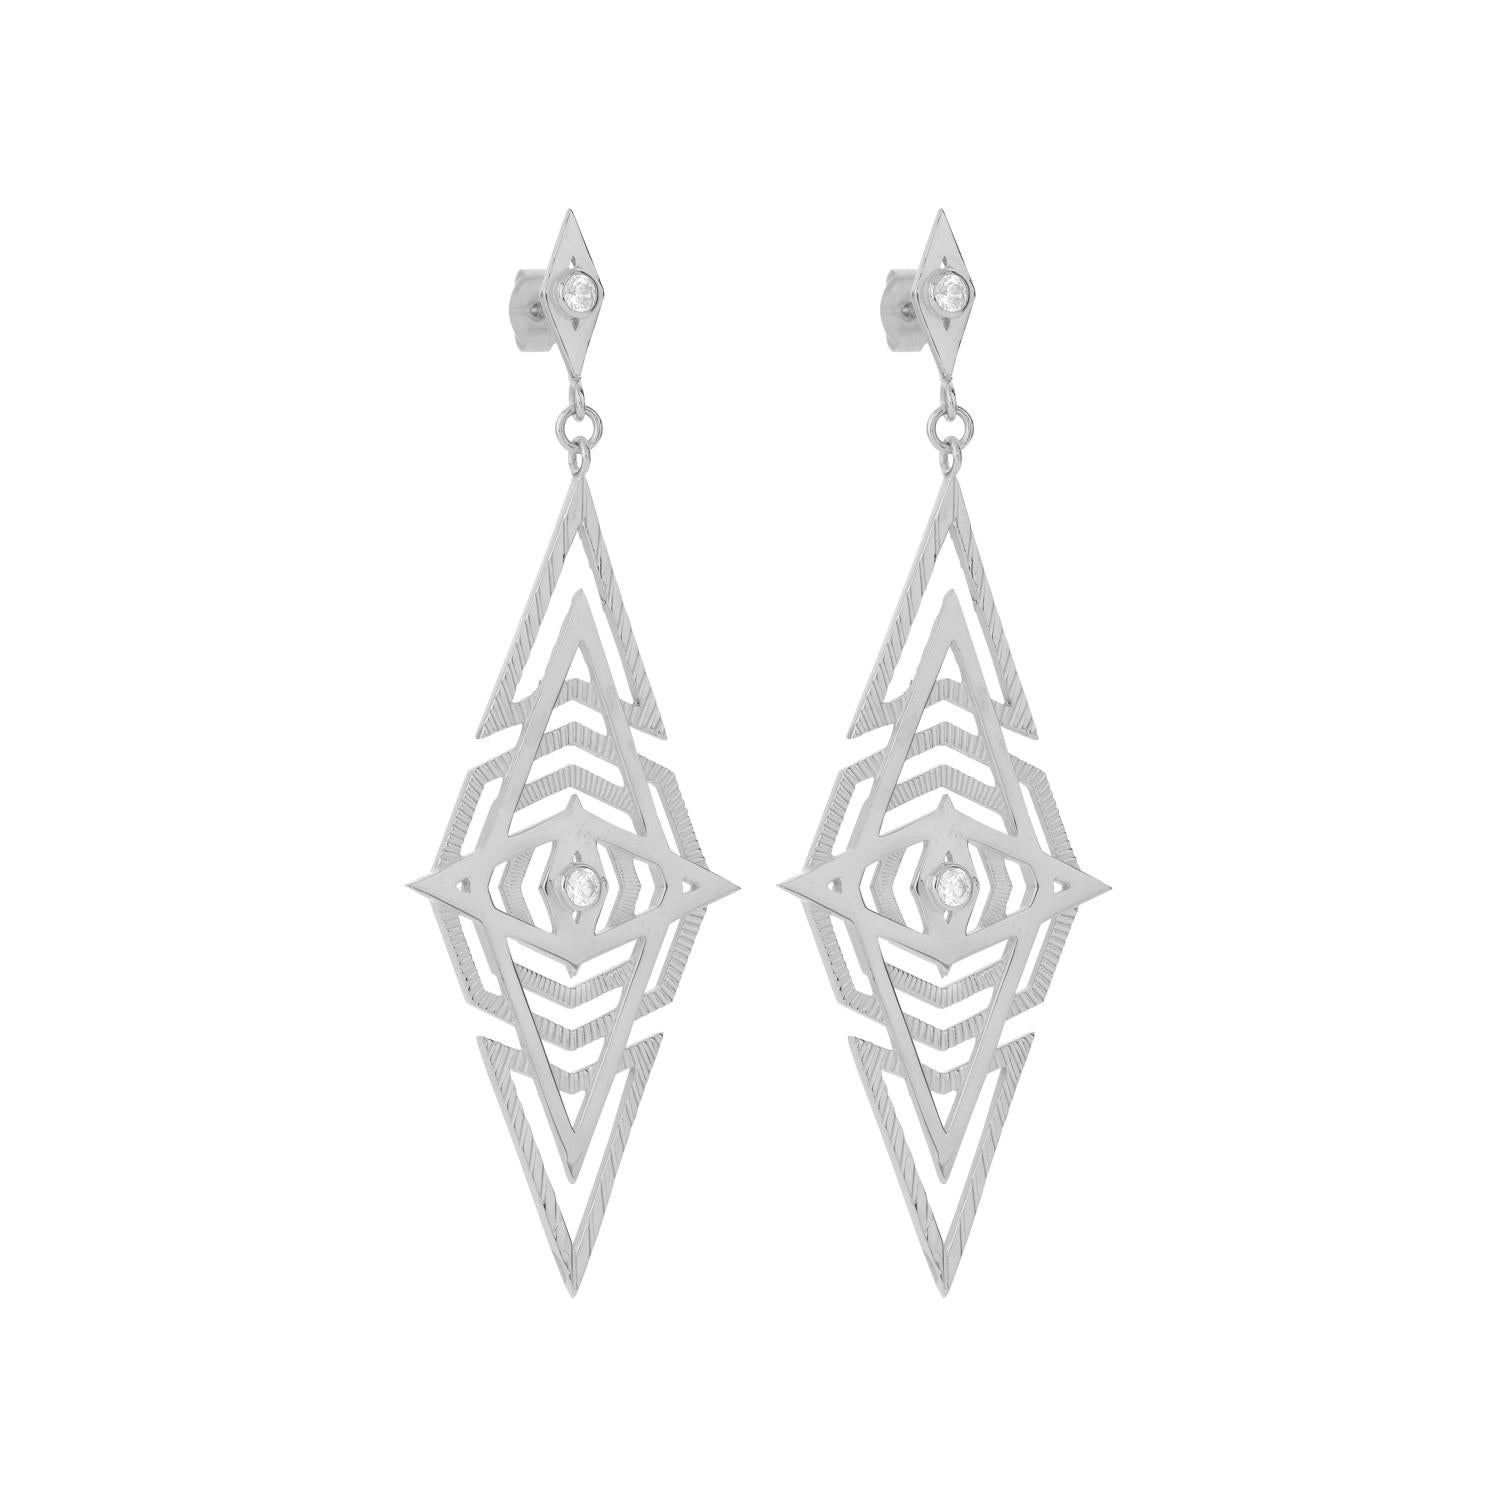 Zoe & Morgan Volcano Earrings were designed while dreaming of the mountains in Nepal and then feeling the earth move when Agung volcano in Bali became active. Volcanoes are both so primal and powerful, encompassing creation and destruction all at